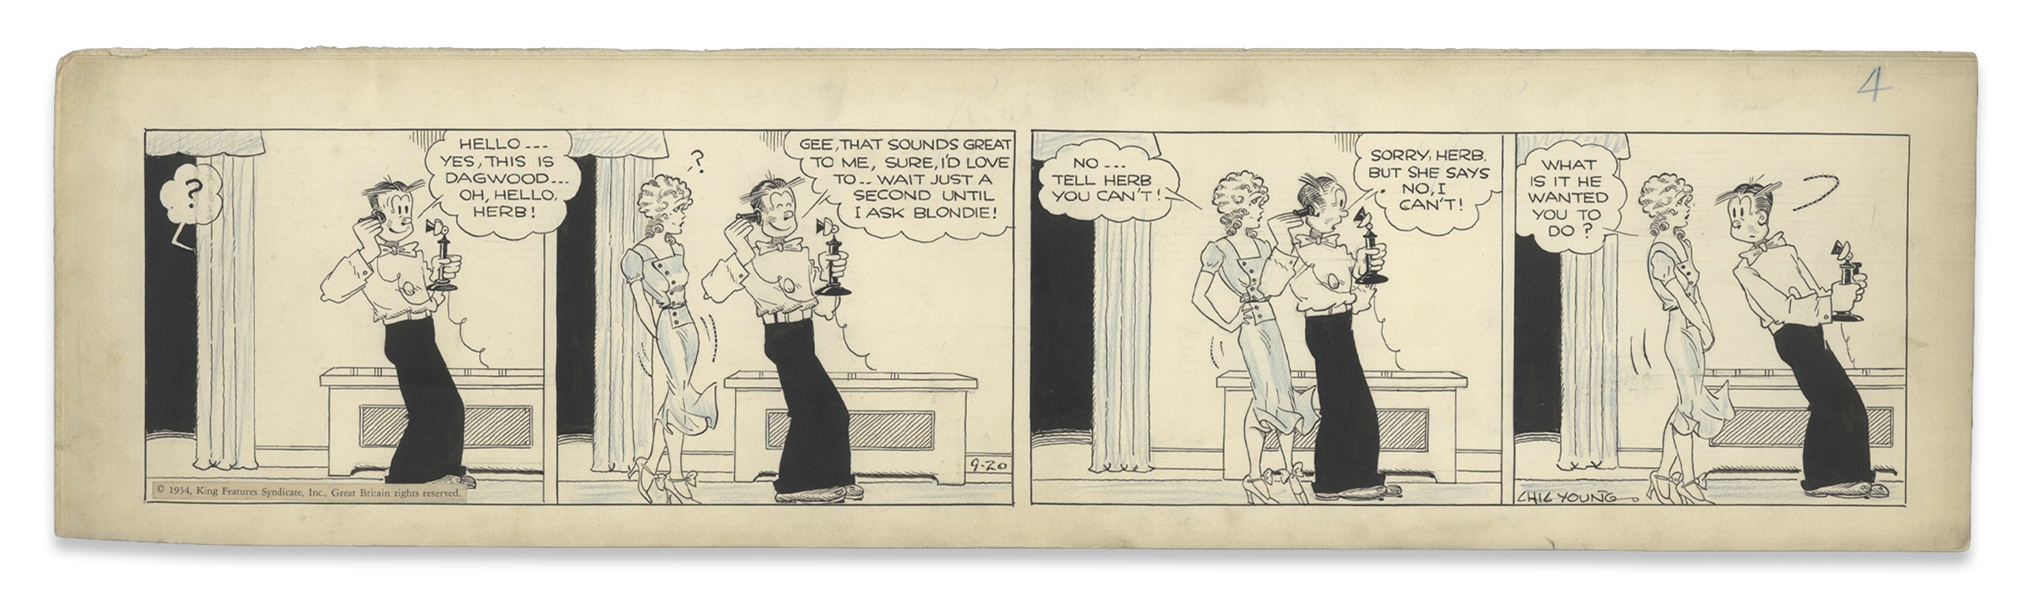 Chic Young Hand-Drawn ''Blondie'' Comic Strip From 1934 Titled ''On General Principles'' -- Blondie Quashes Dagwood's Fun